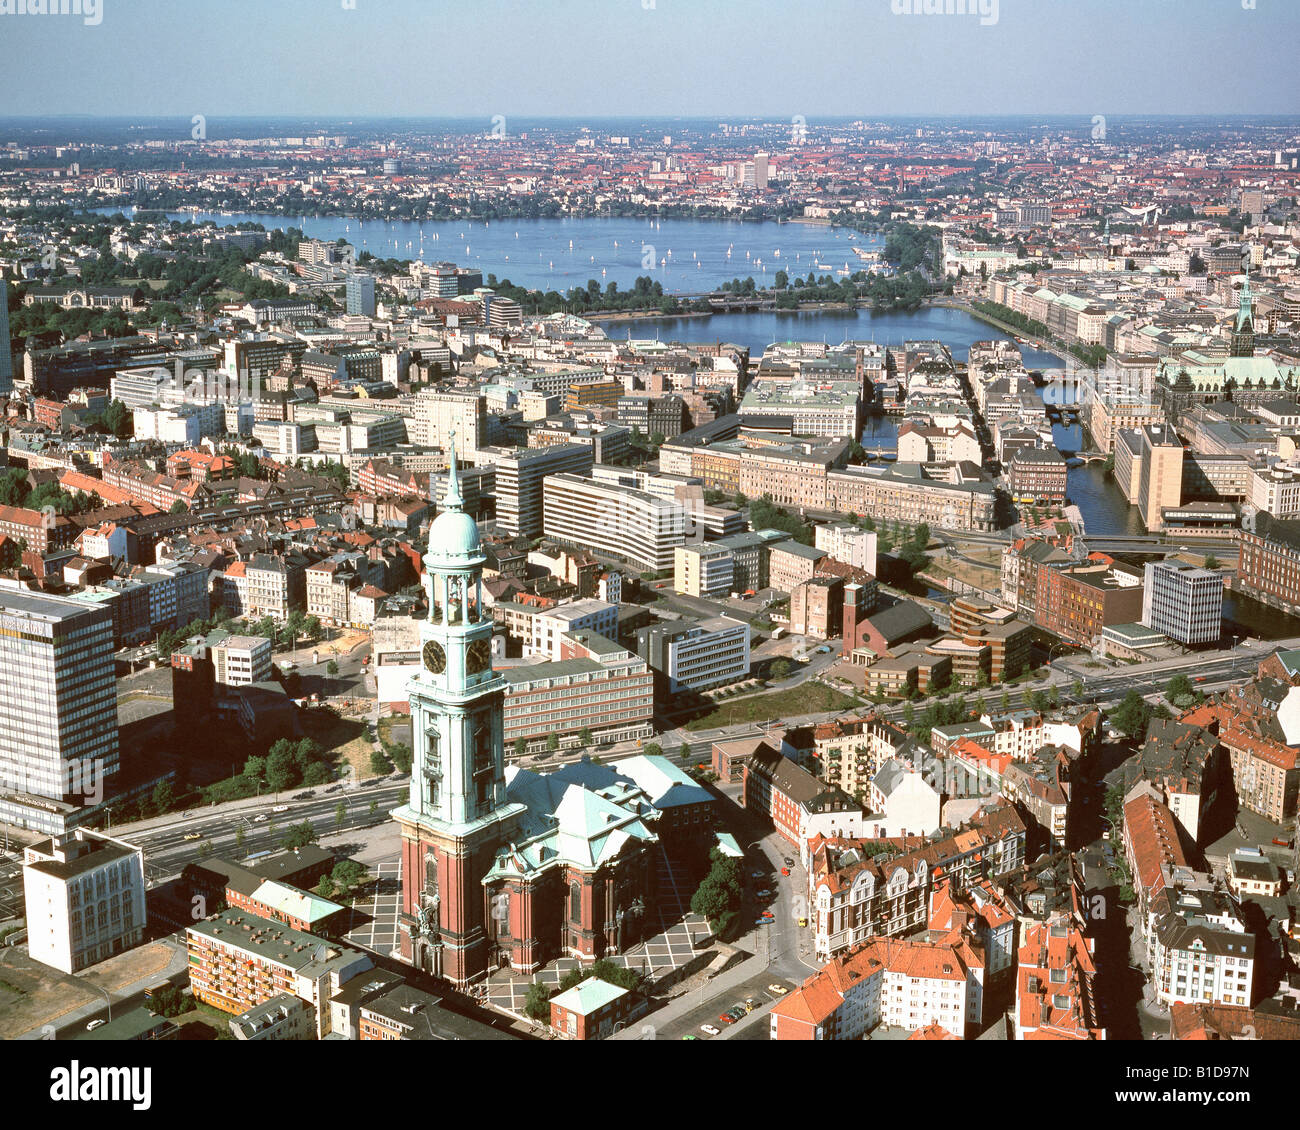 DE - HAMBURG: The City Centre & River Alster from the air Stock Photo